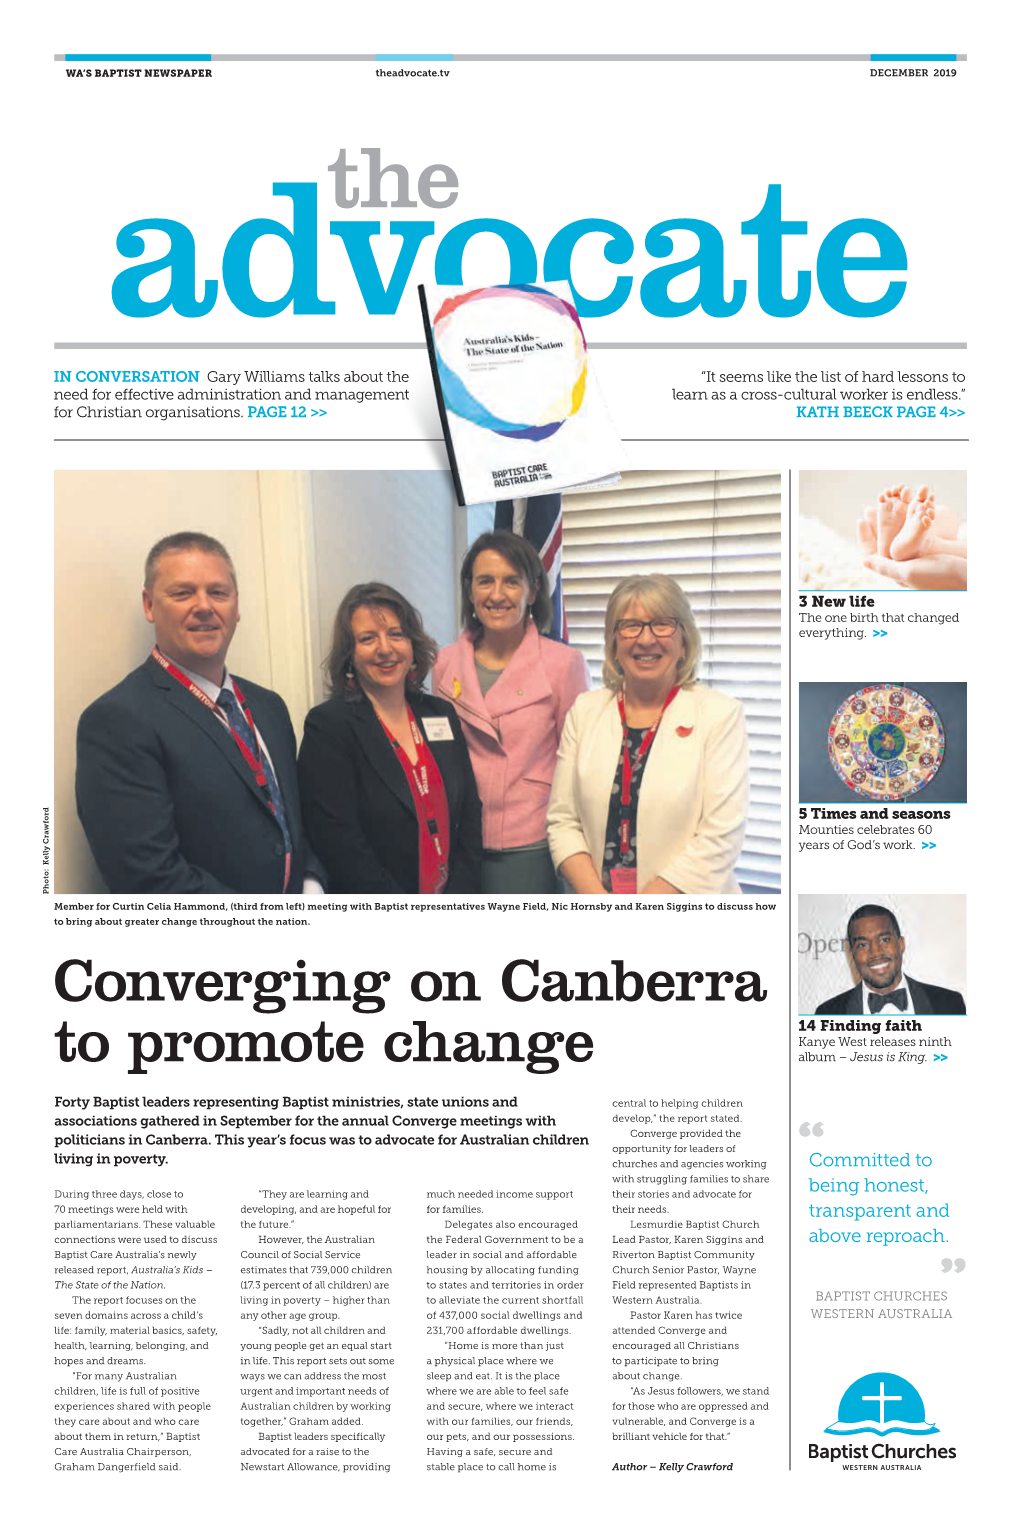 Converging on Canberra to Promote Change